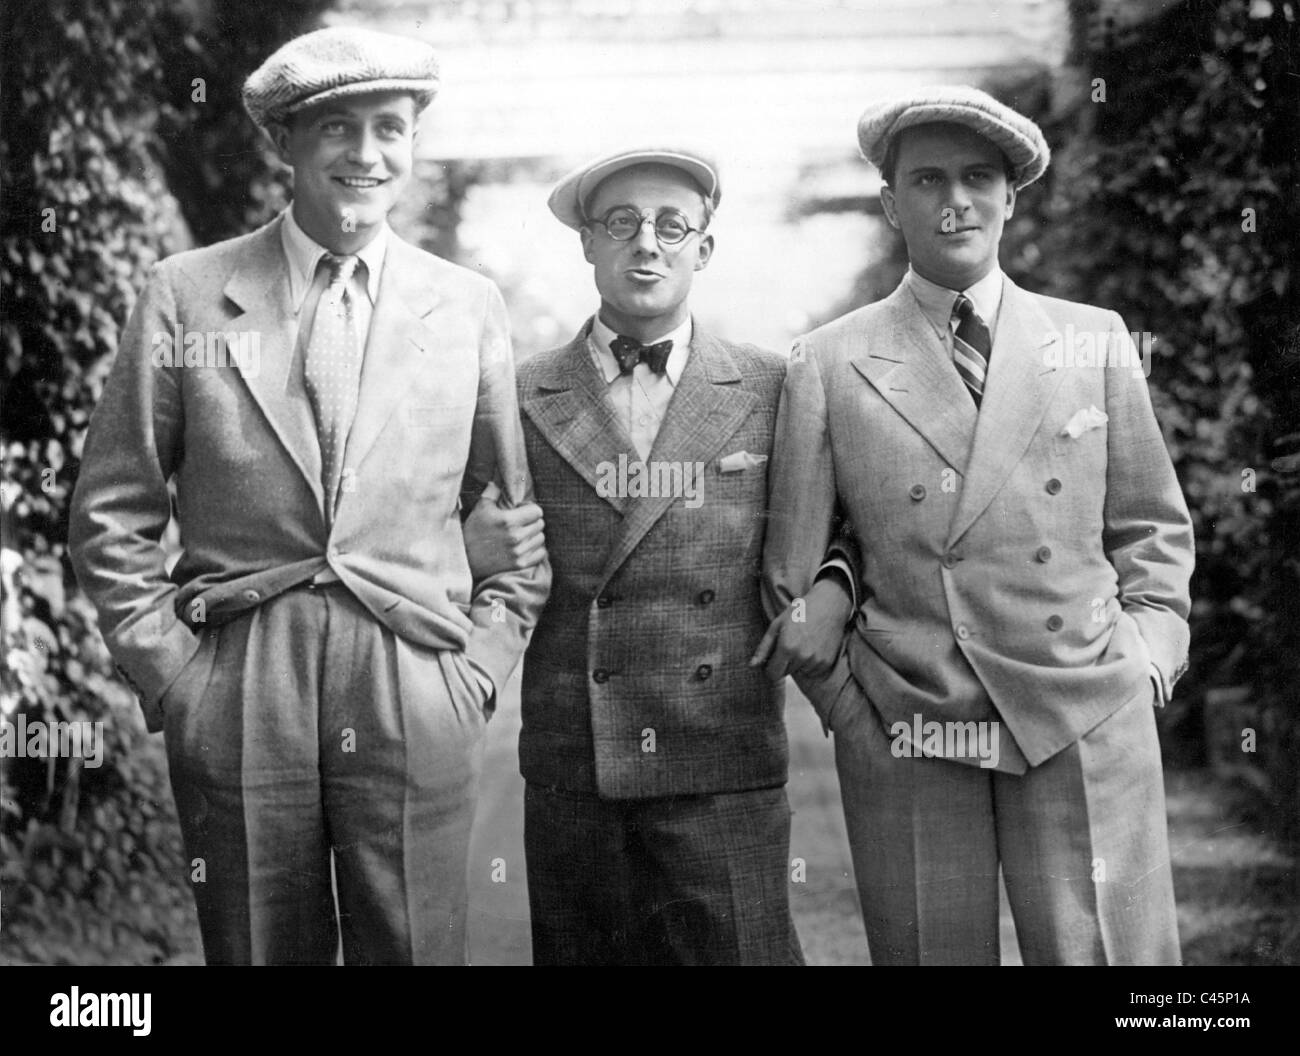 Wilhelm fritsch hi-res stock photography and images - Alamy